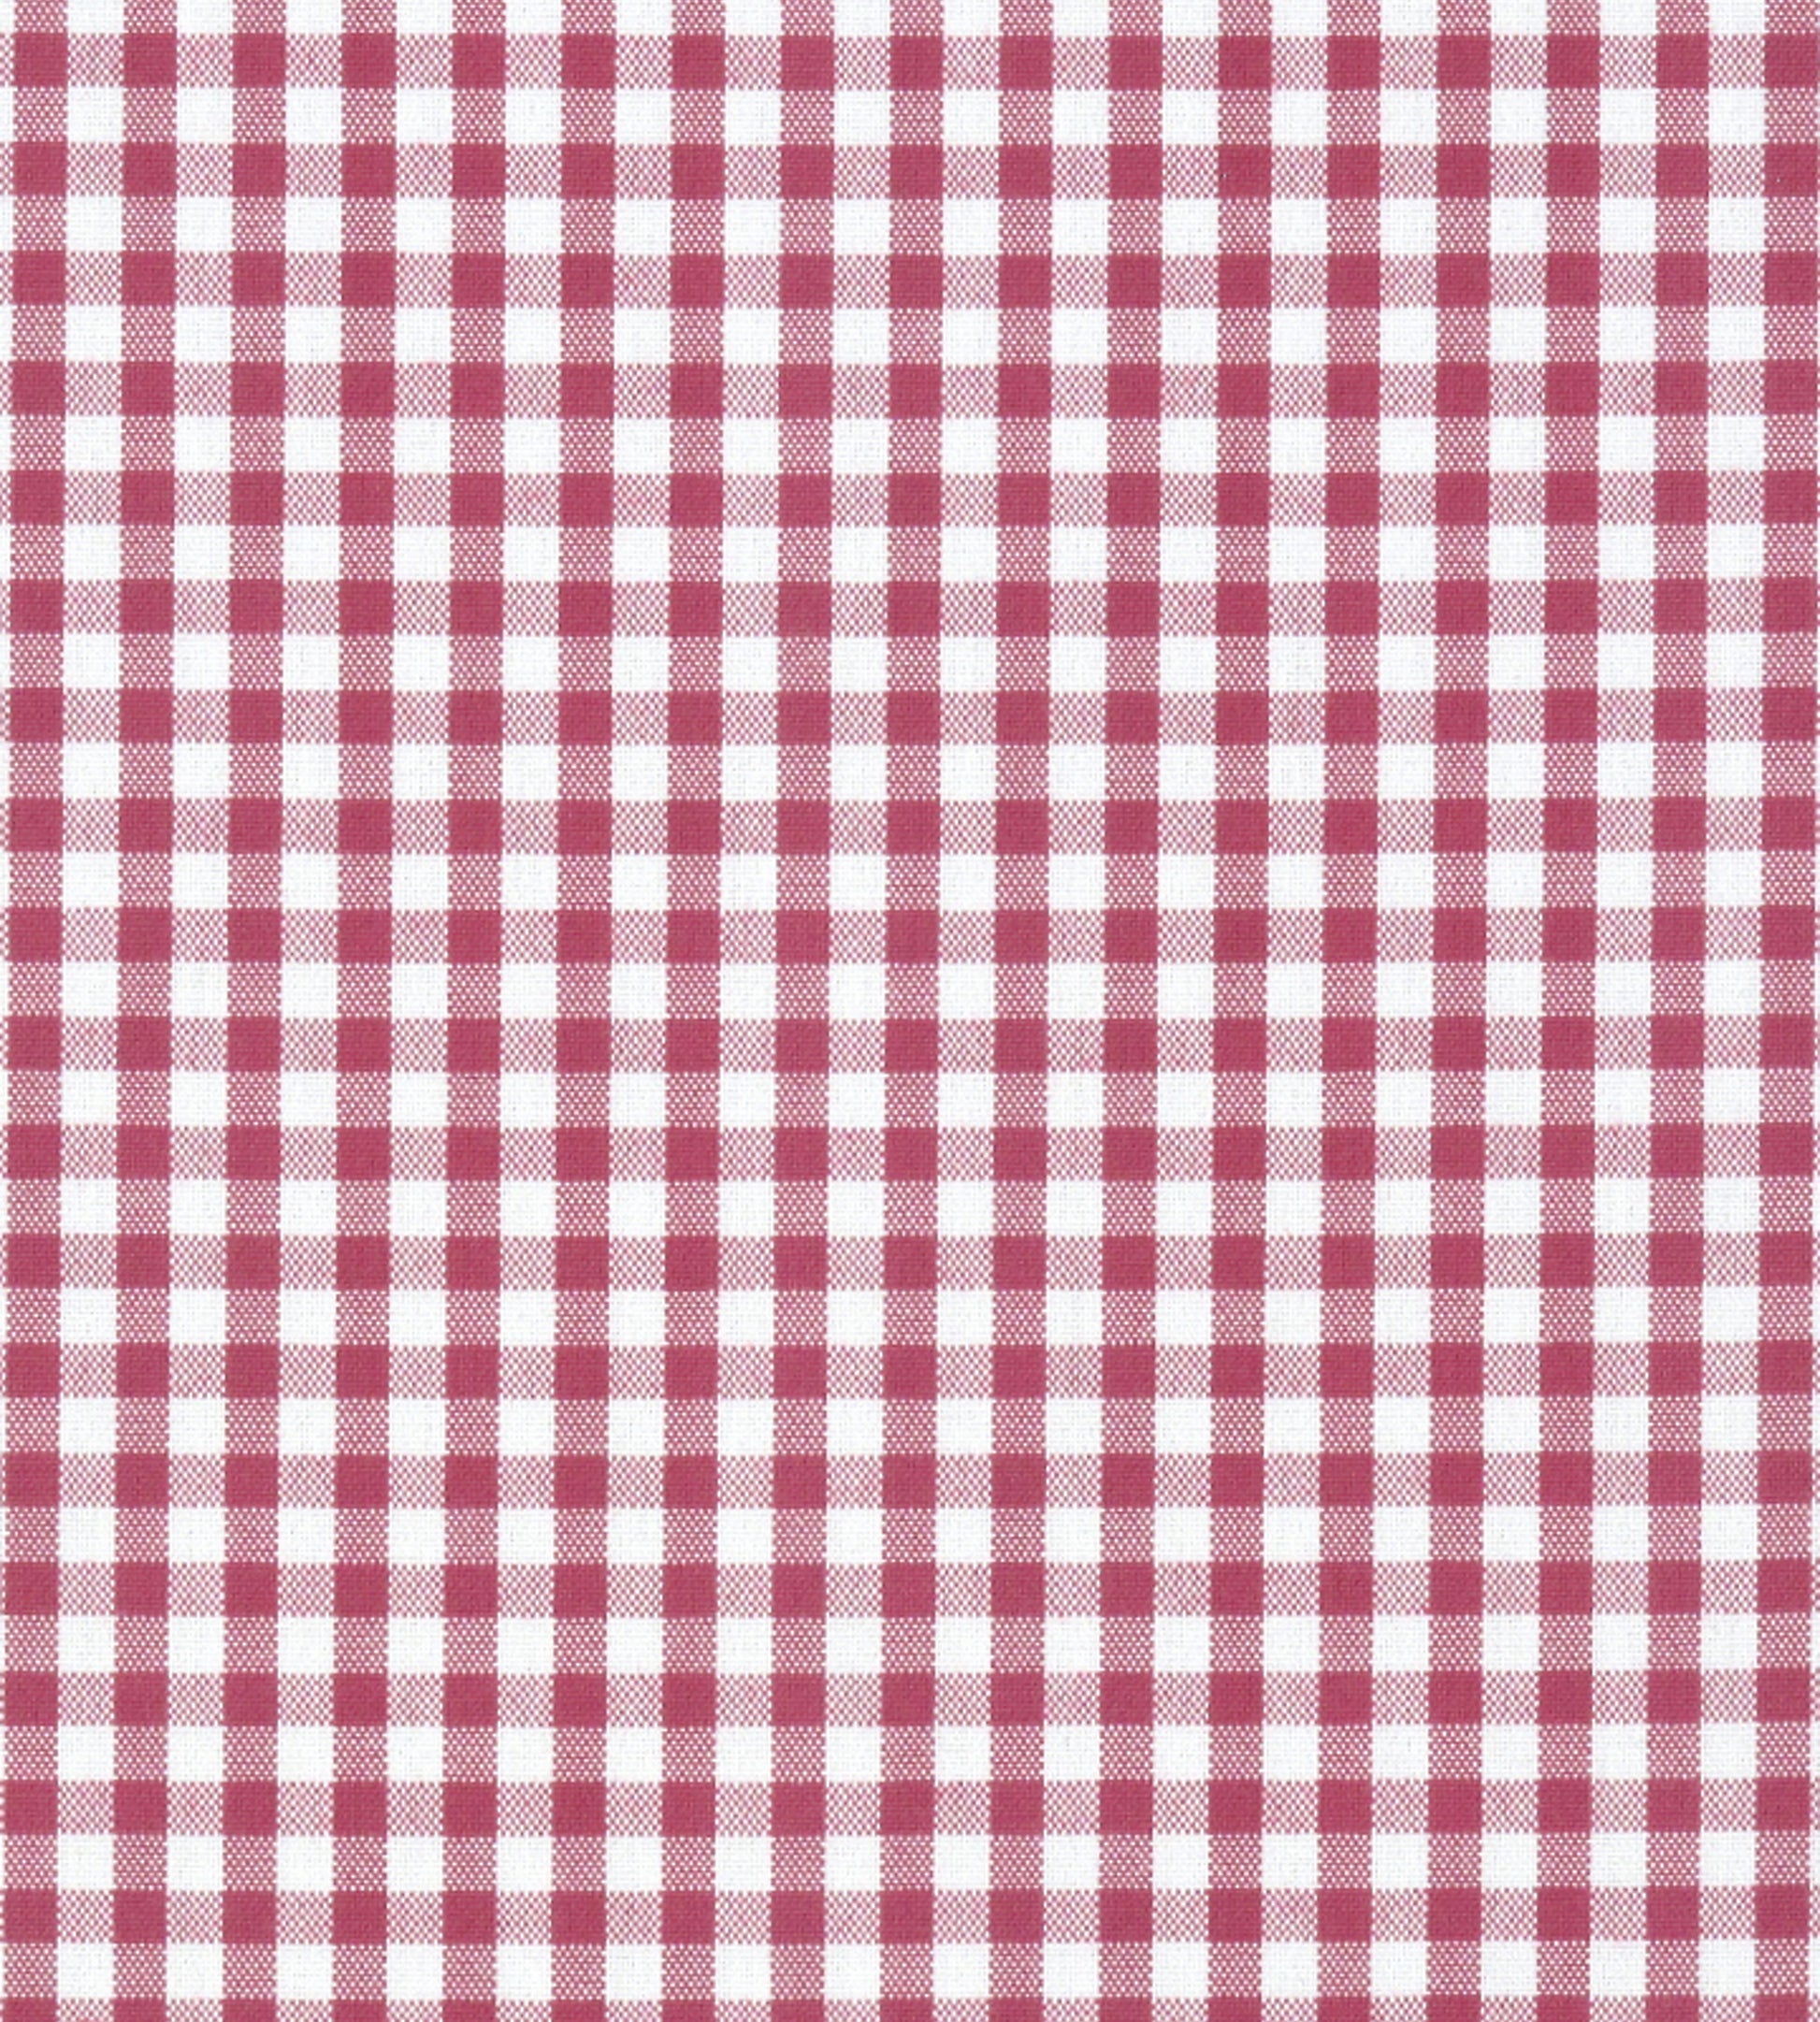 Purchase Old World Weavers Fabric Product F3 00093018, Poker Check Berry 1